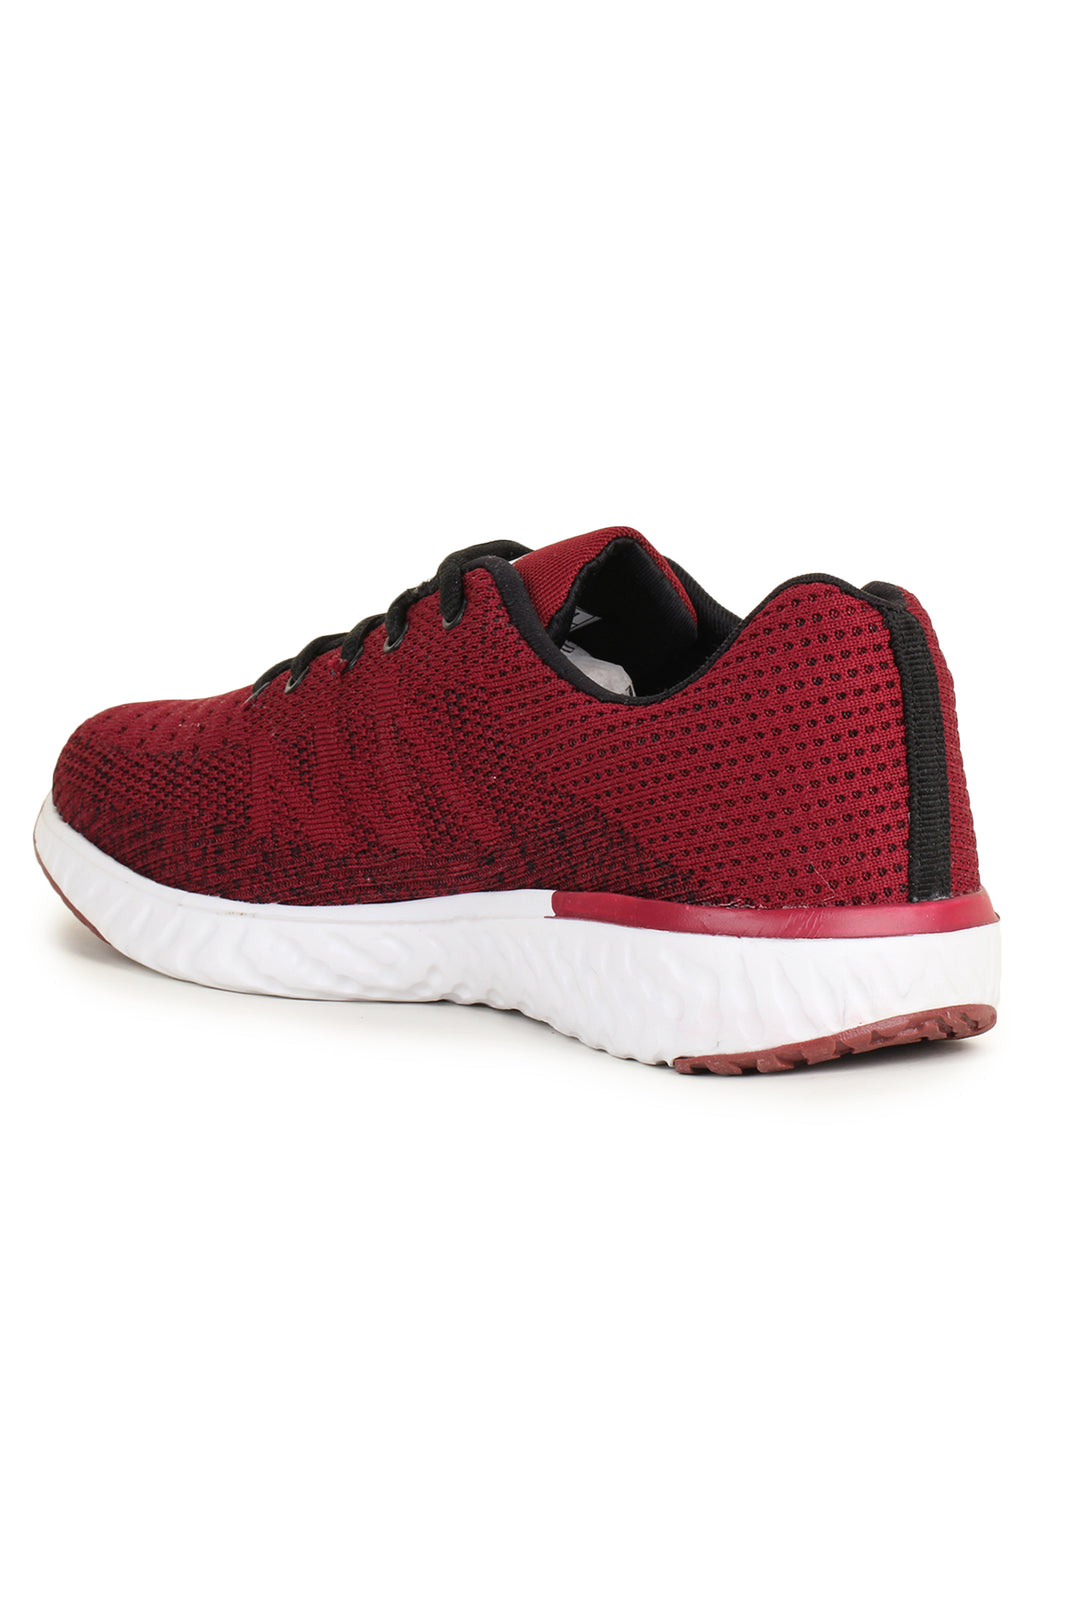 Maroon Solid Mesh Lace Up Running Sport Shoes For Men